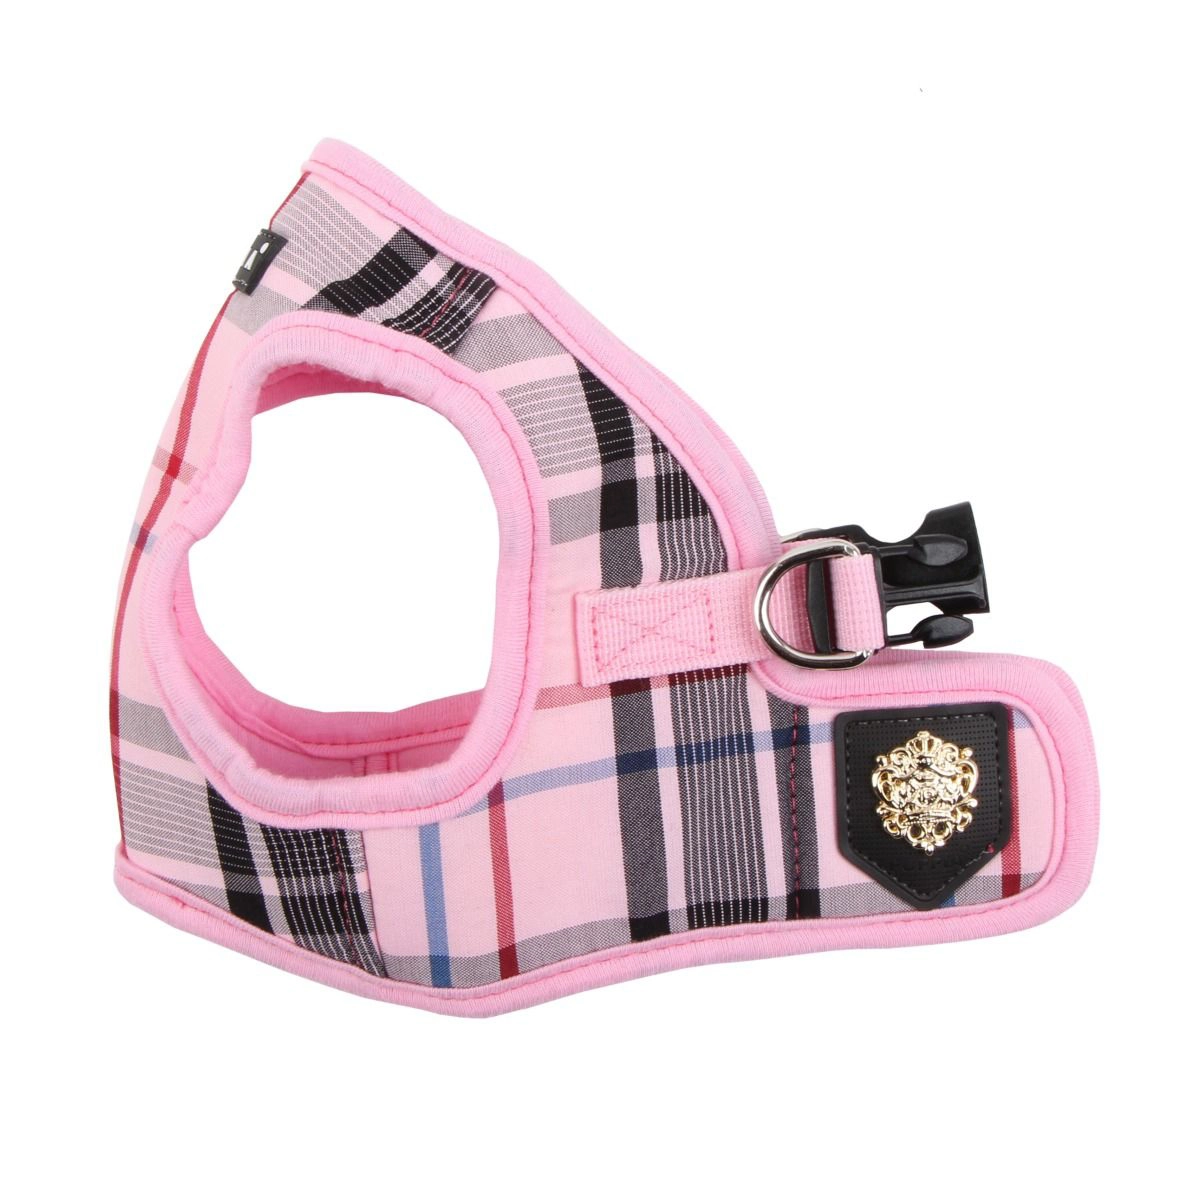 Junior Dog Harness Vest by Puppia - Pink